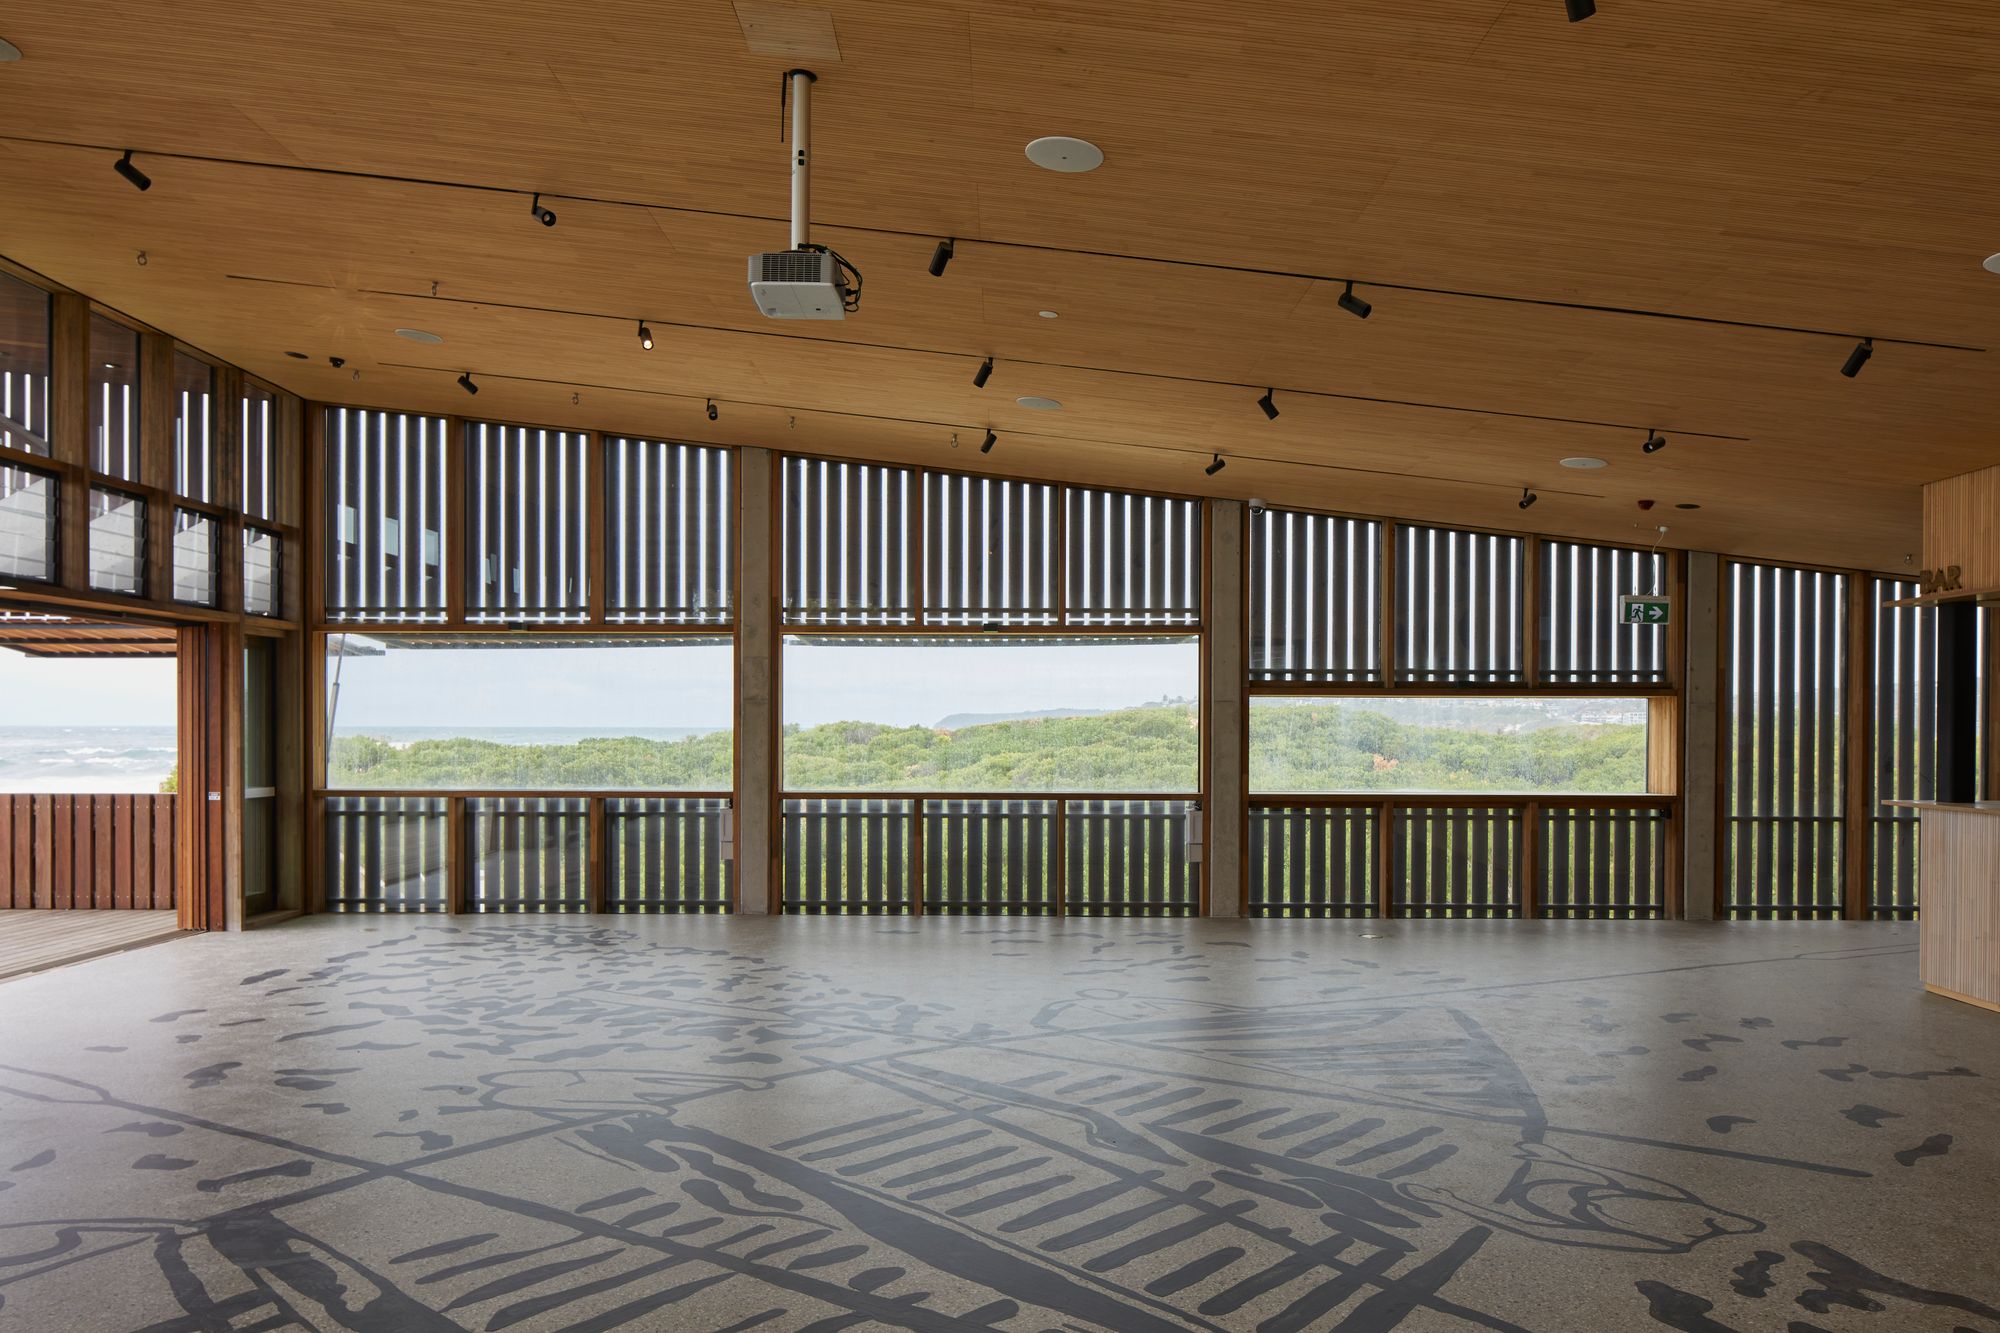 Long Reef SLSC by Adriano Pupilli Architects showing interior of function room